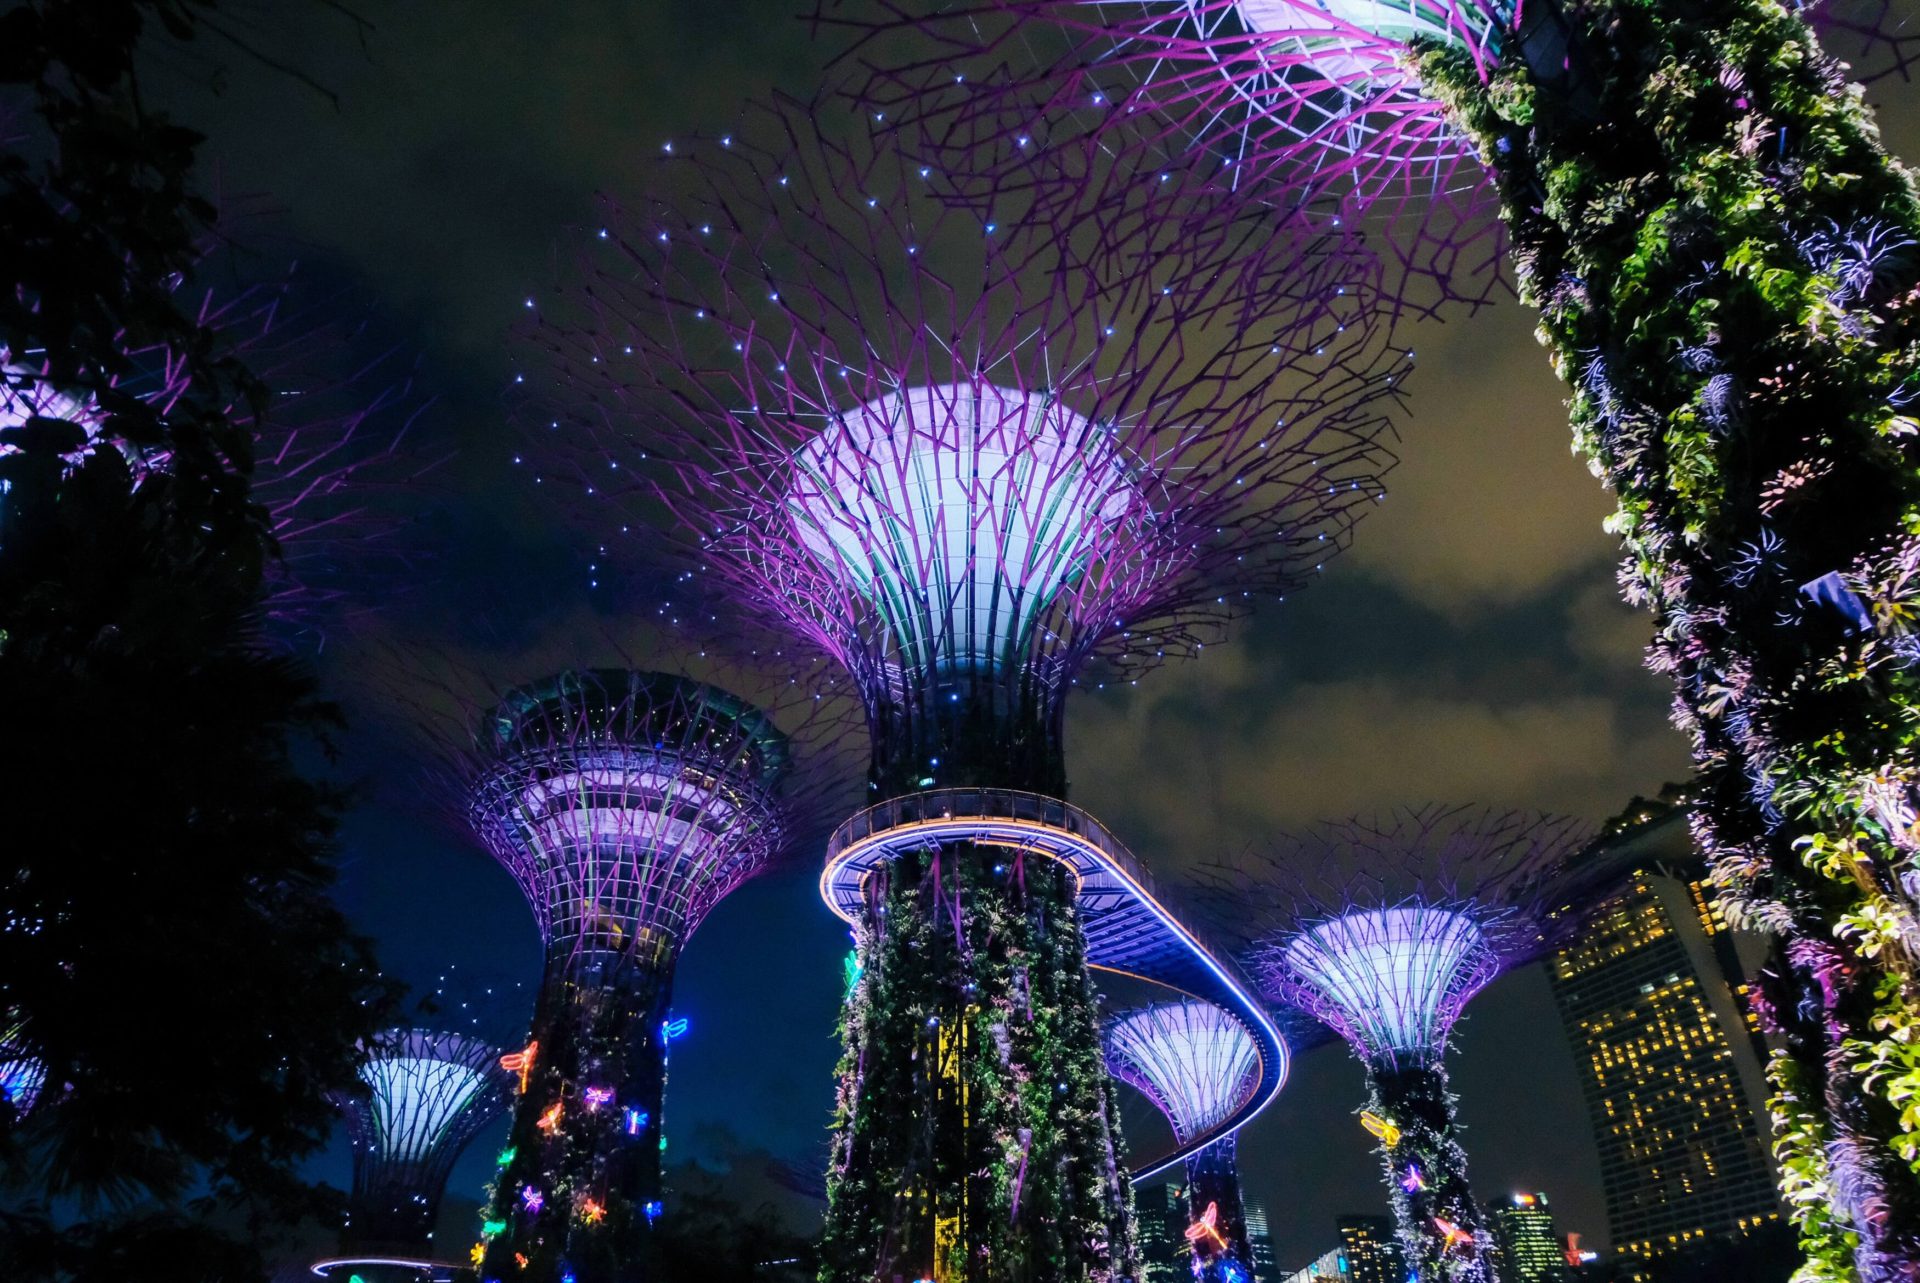 Supertree Grove lit up at night in gardens by the bay, Singapore